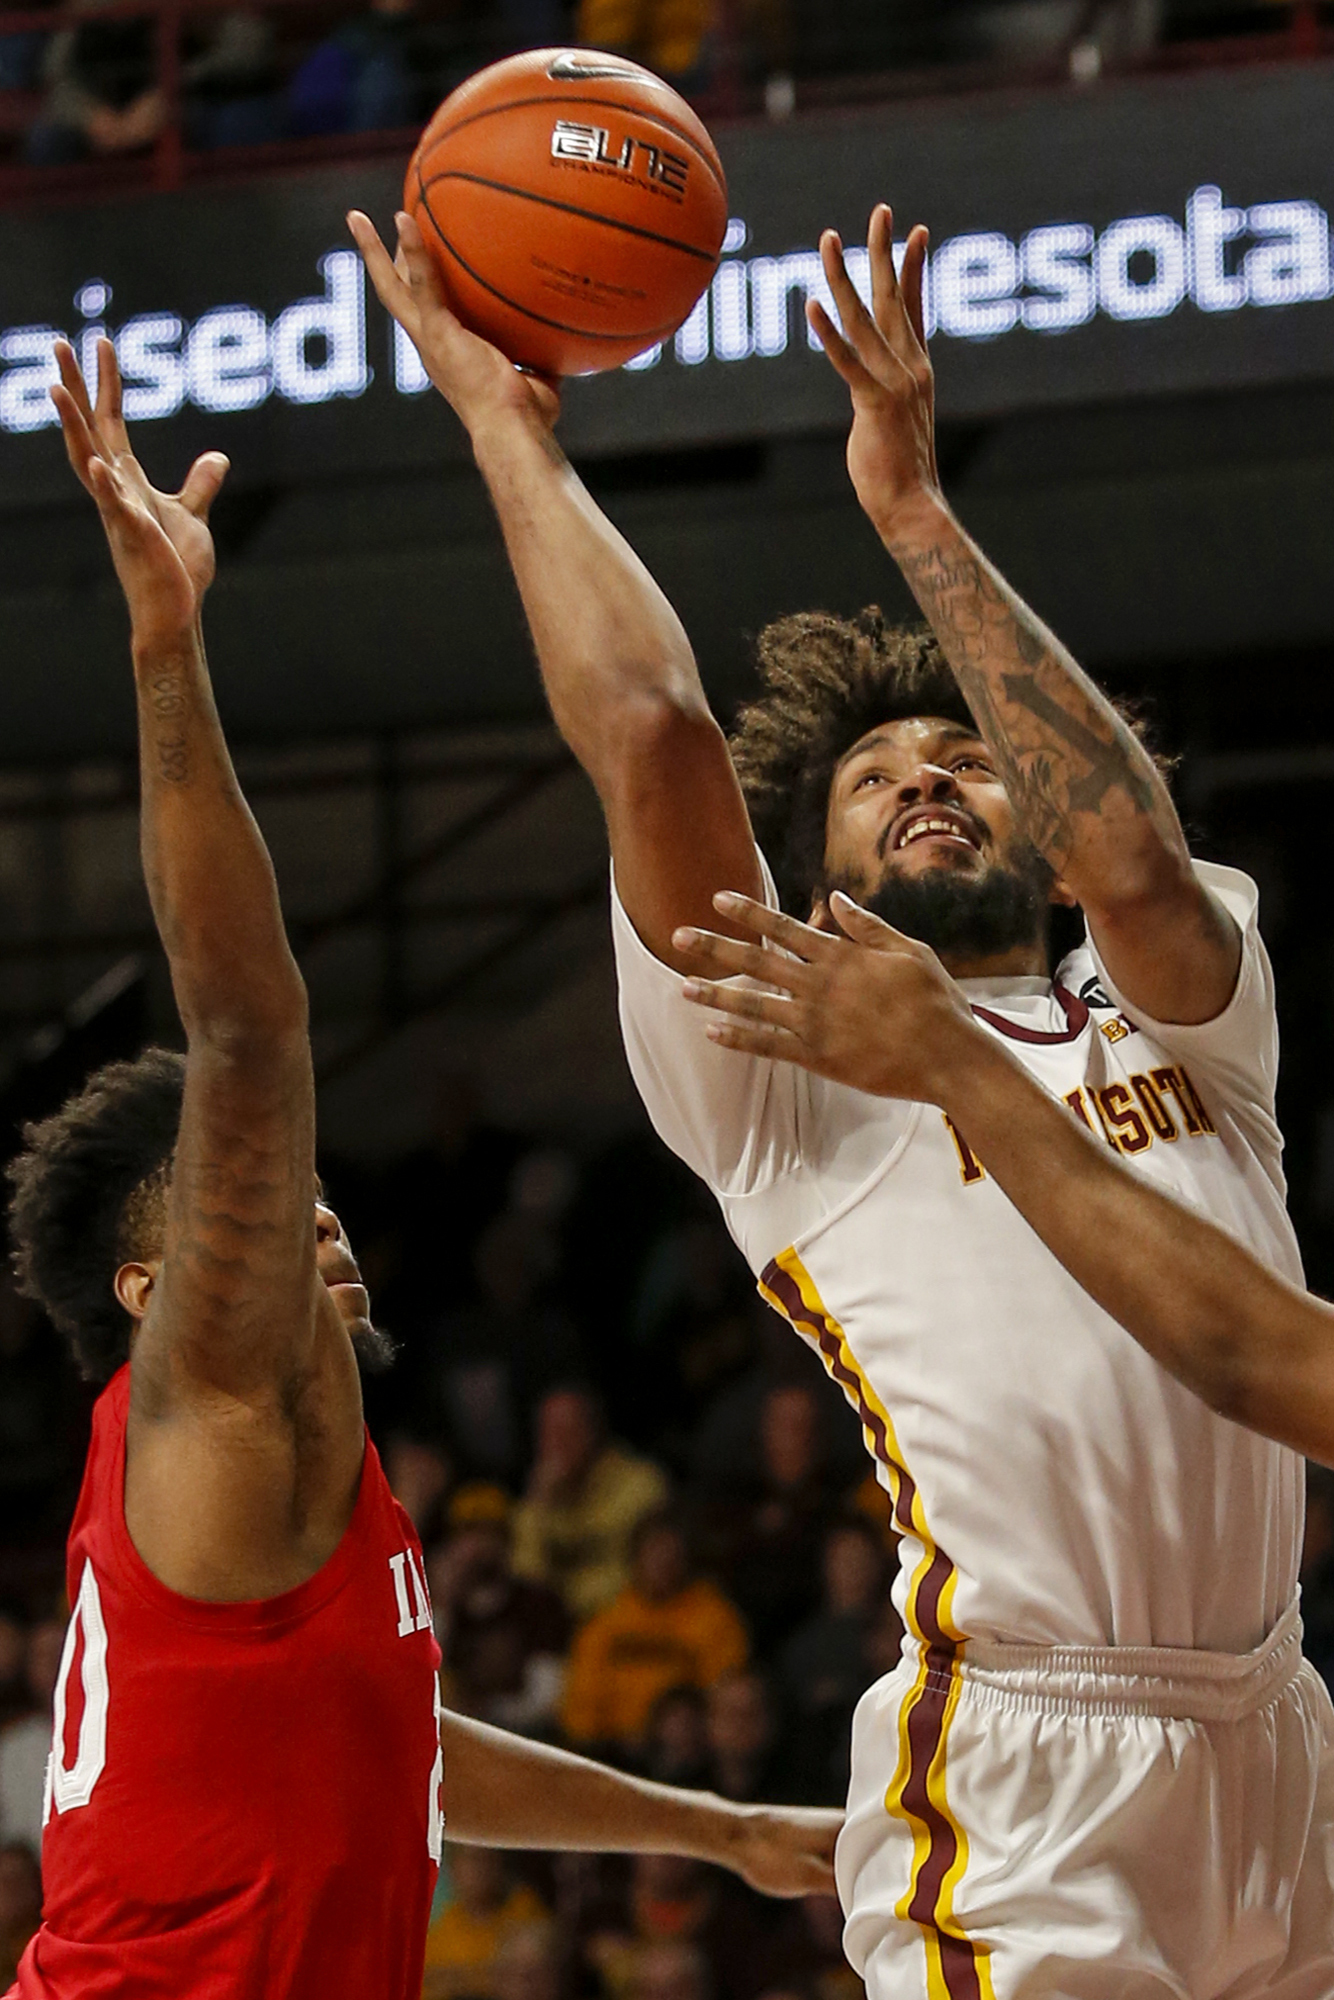 Murphy, Minnesota end 4-game skid with 84-63 win vs. Indiana